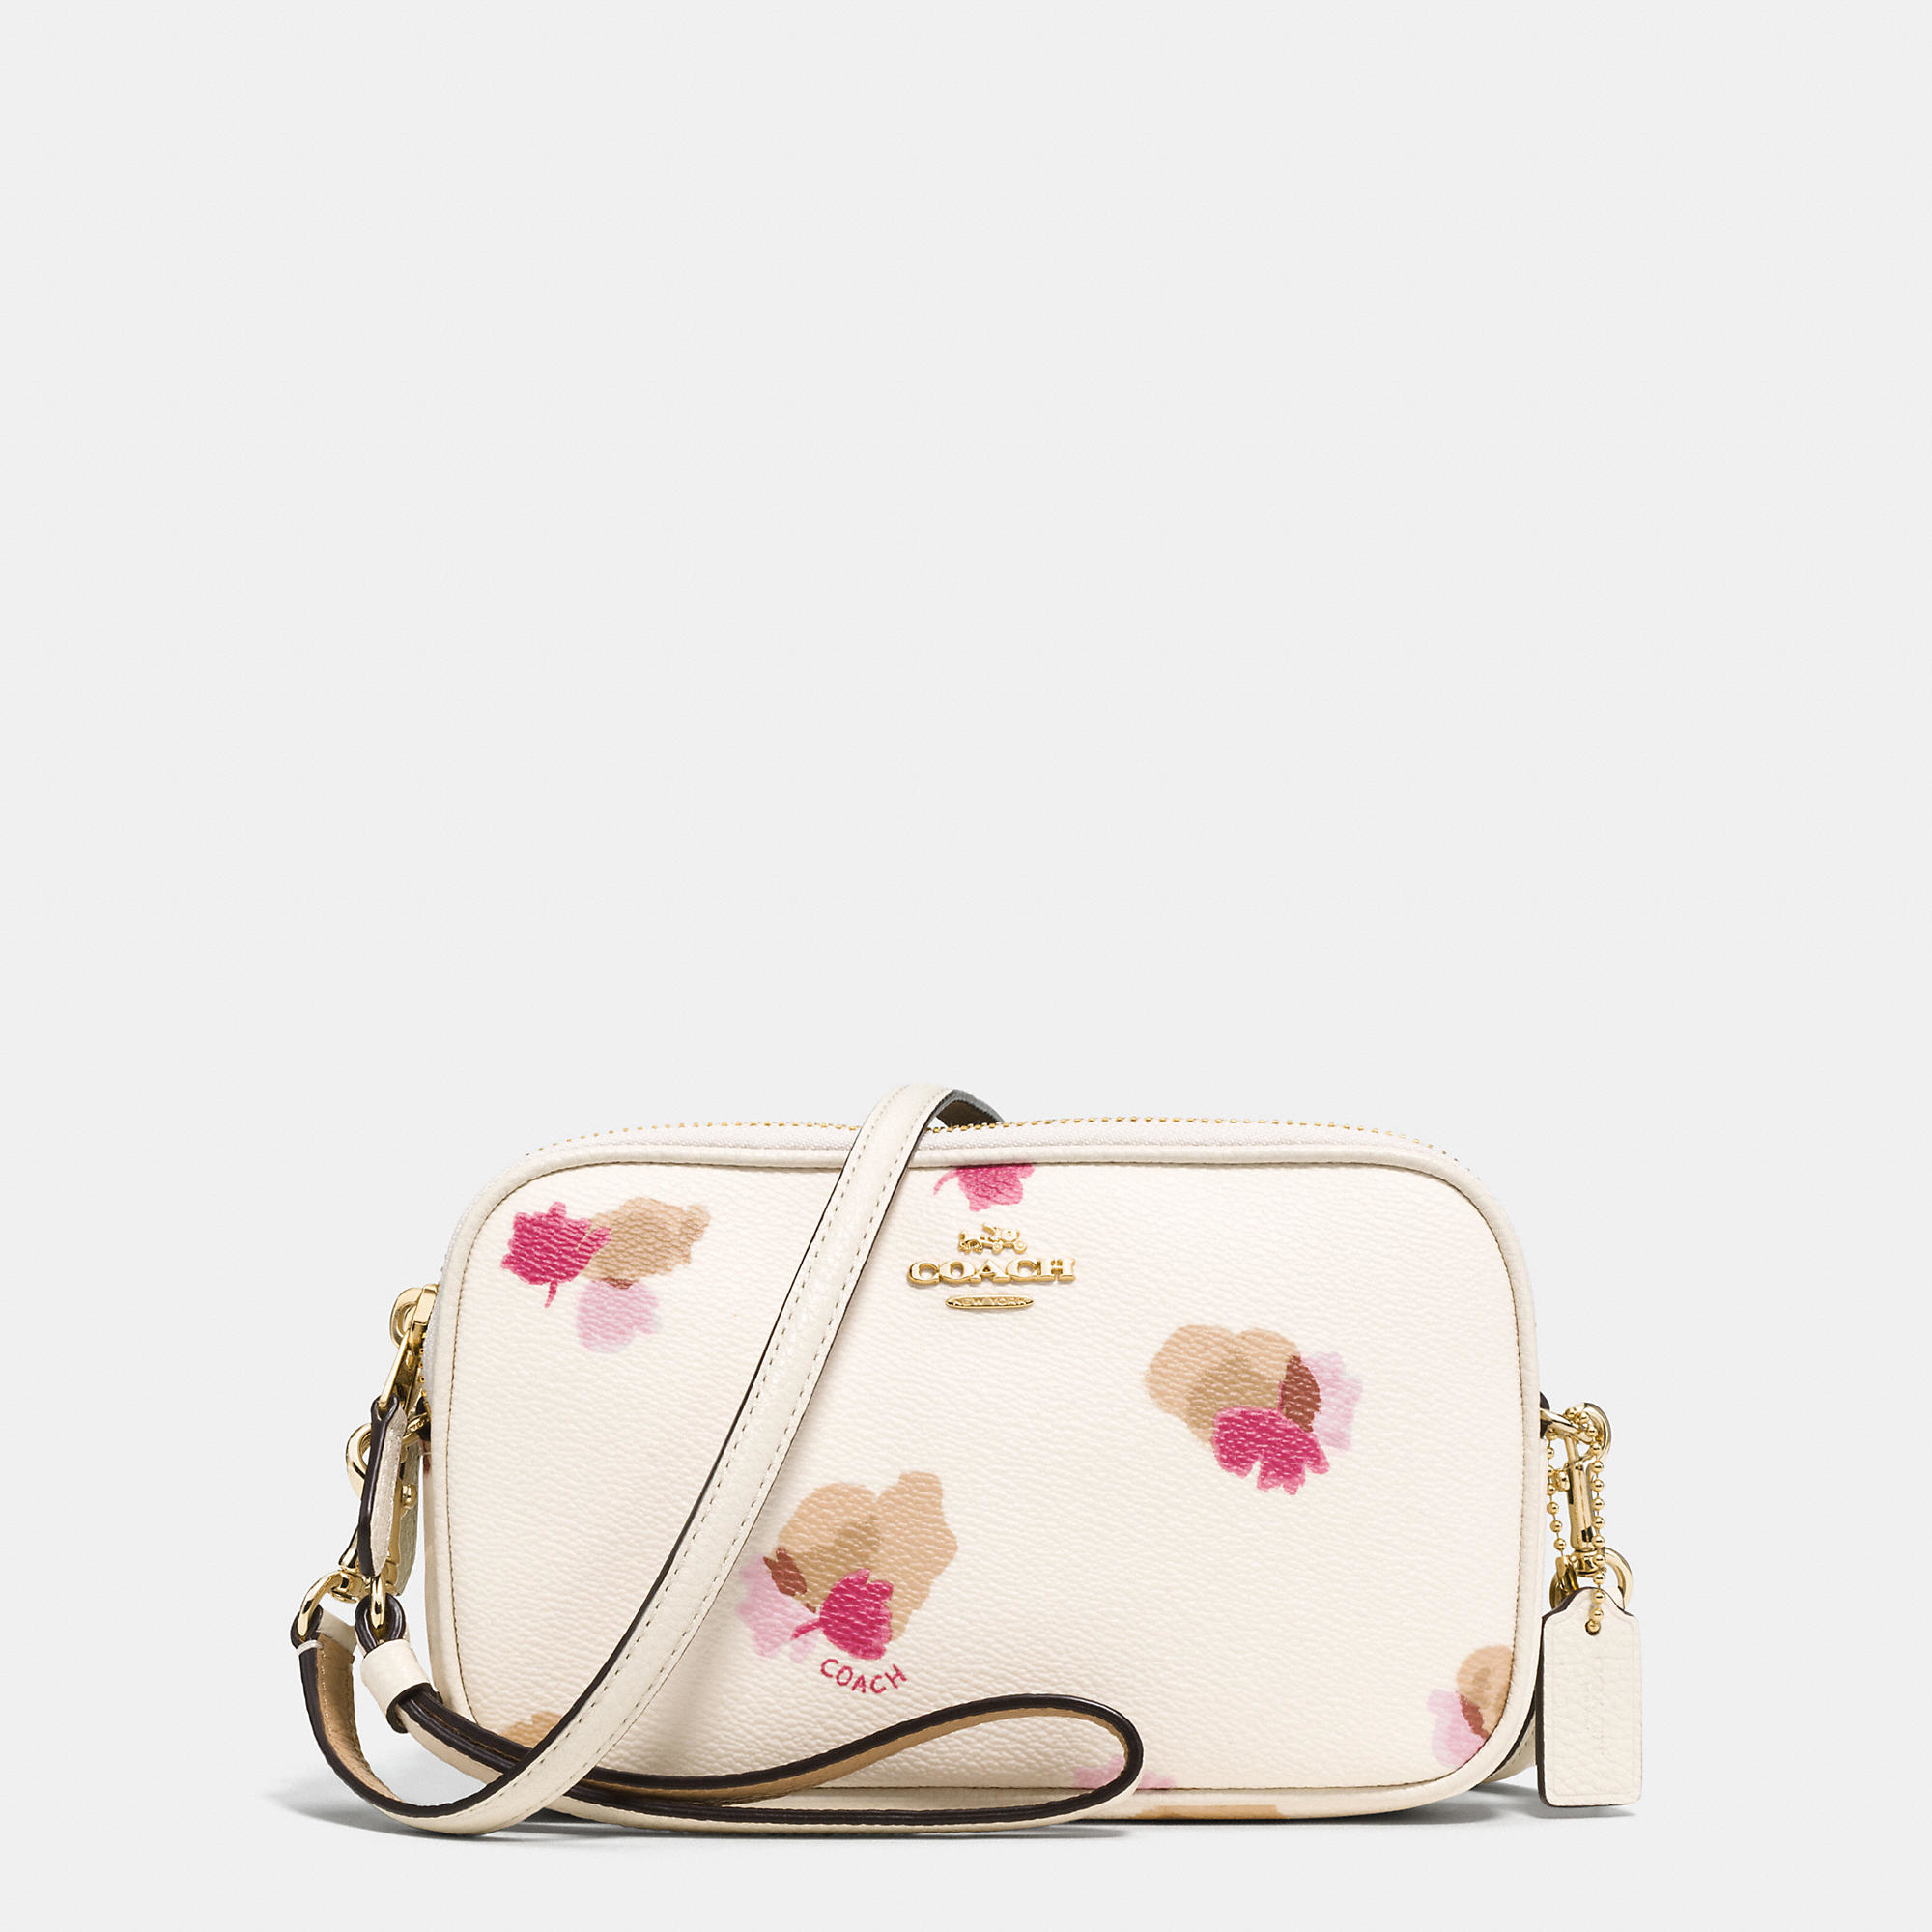 Lyst - Coach Crossbody Clutch In Floral Print Coated Canvas in White